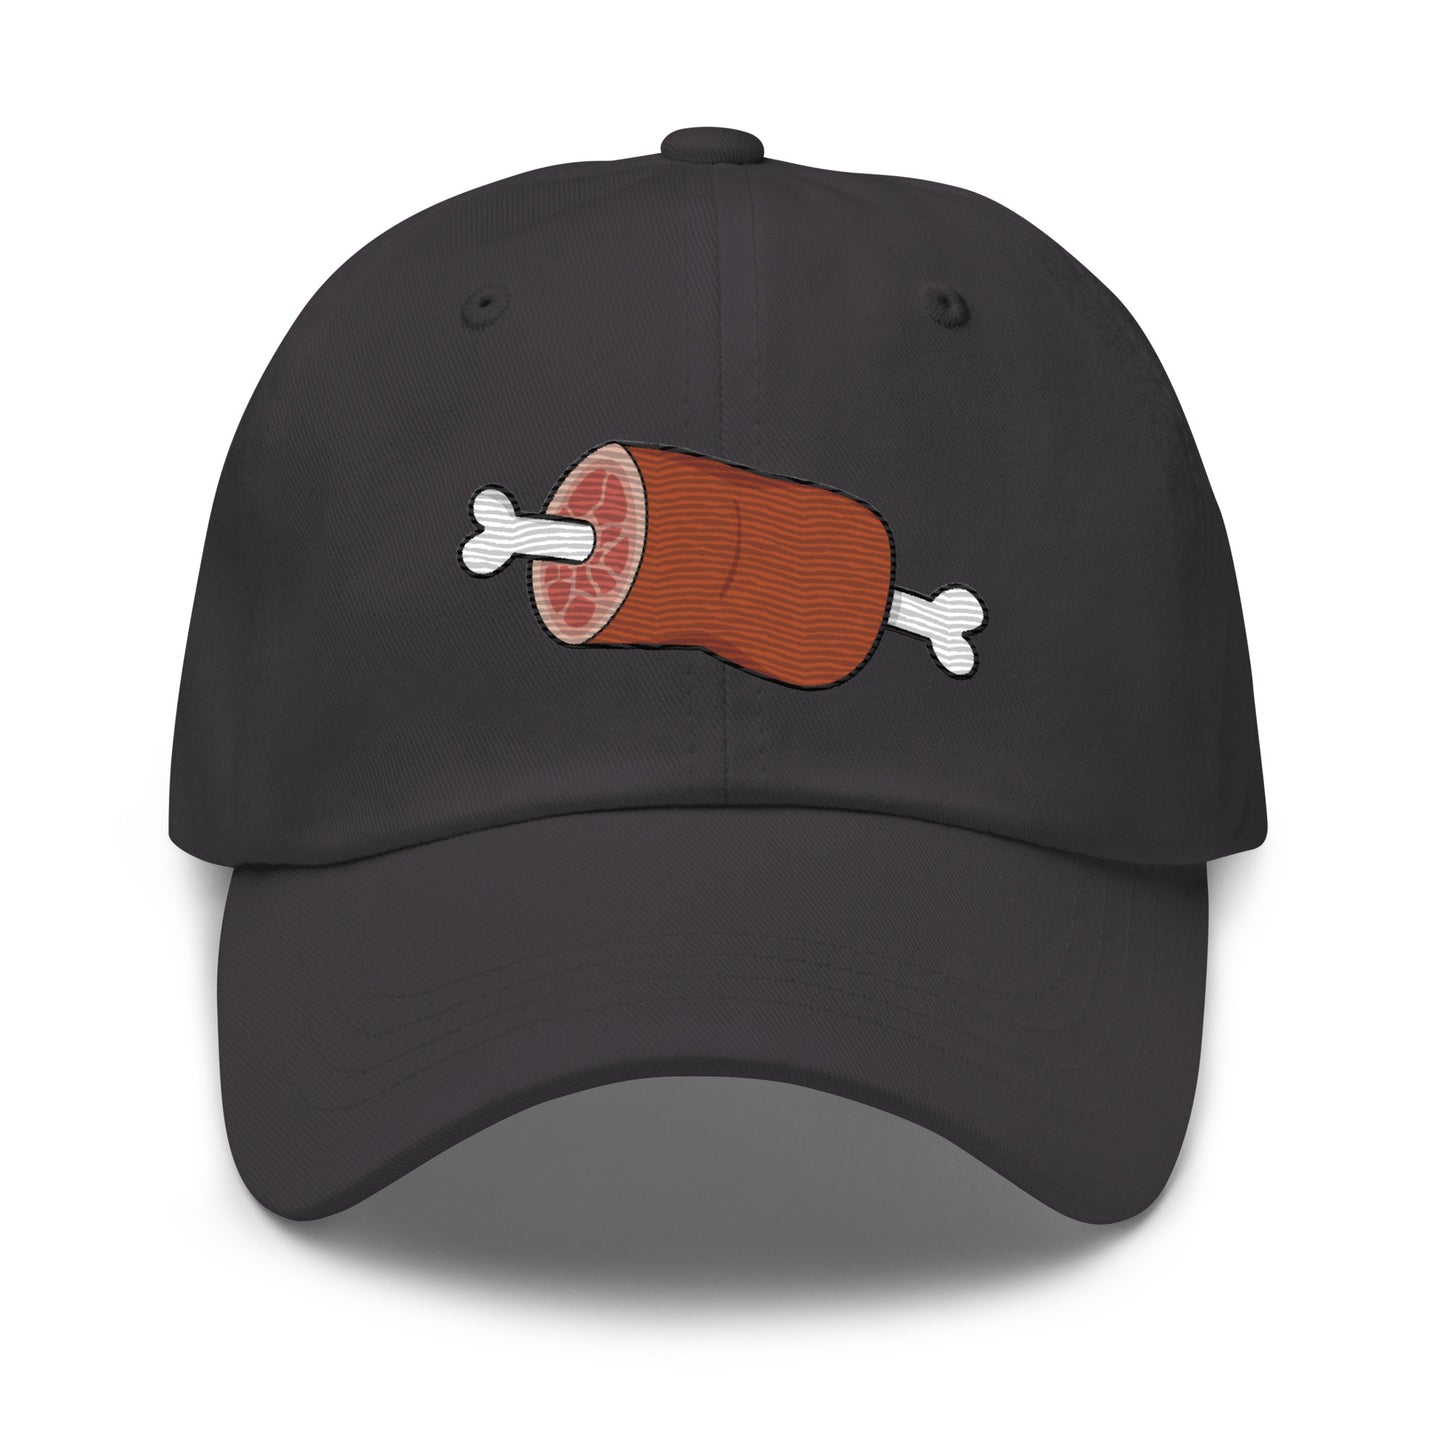 Anime Meat Dad hat